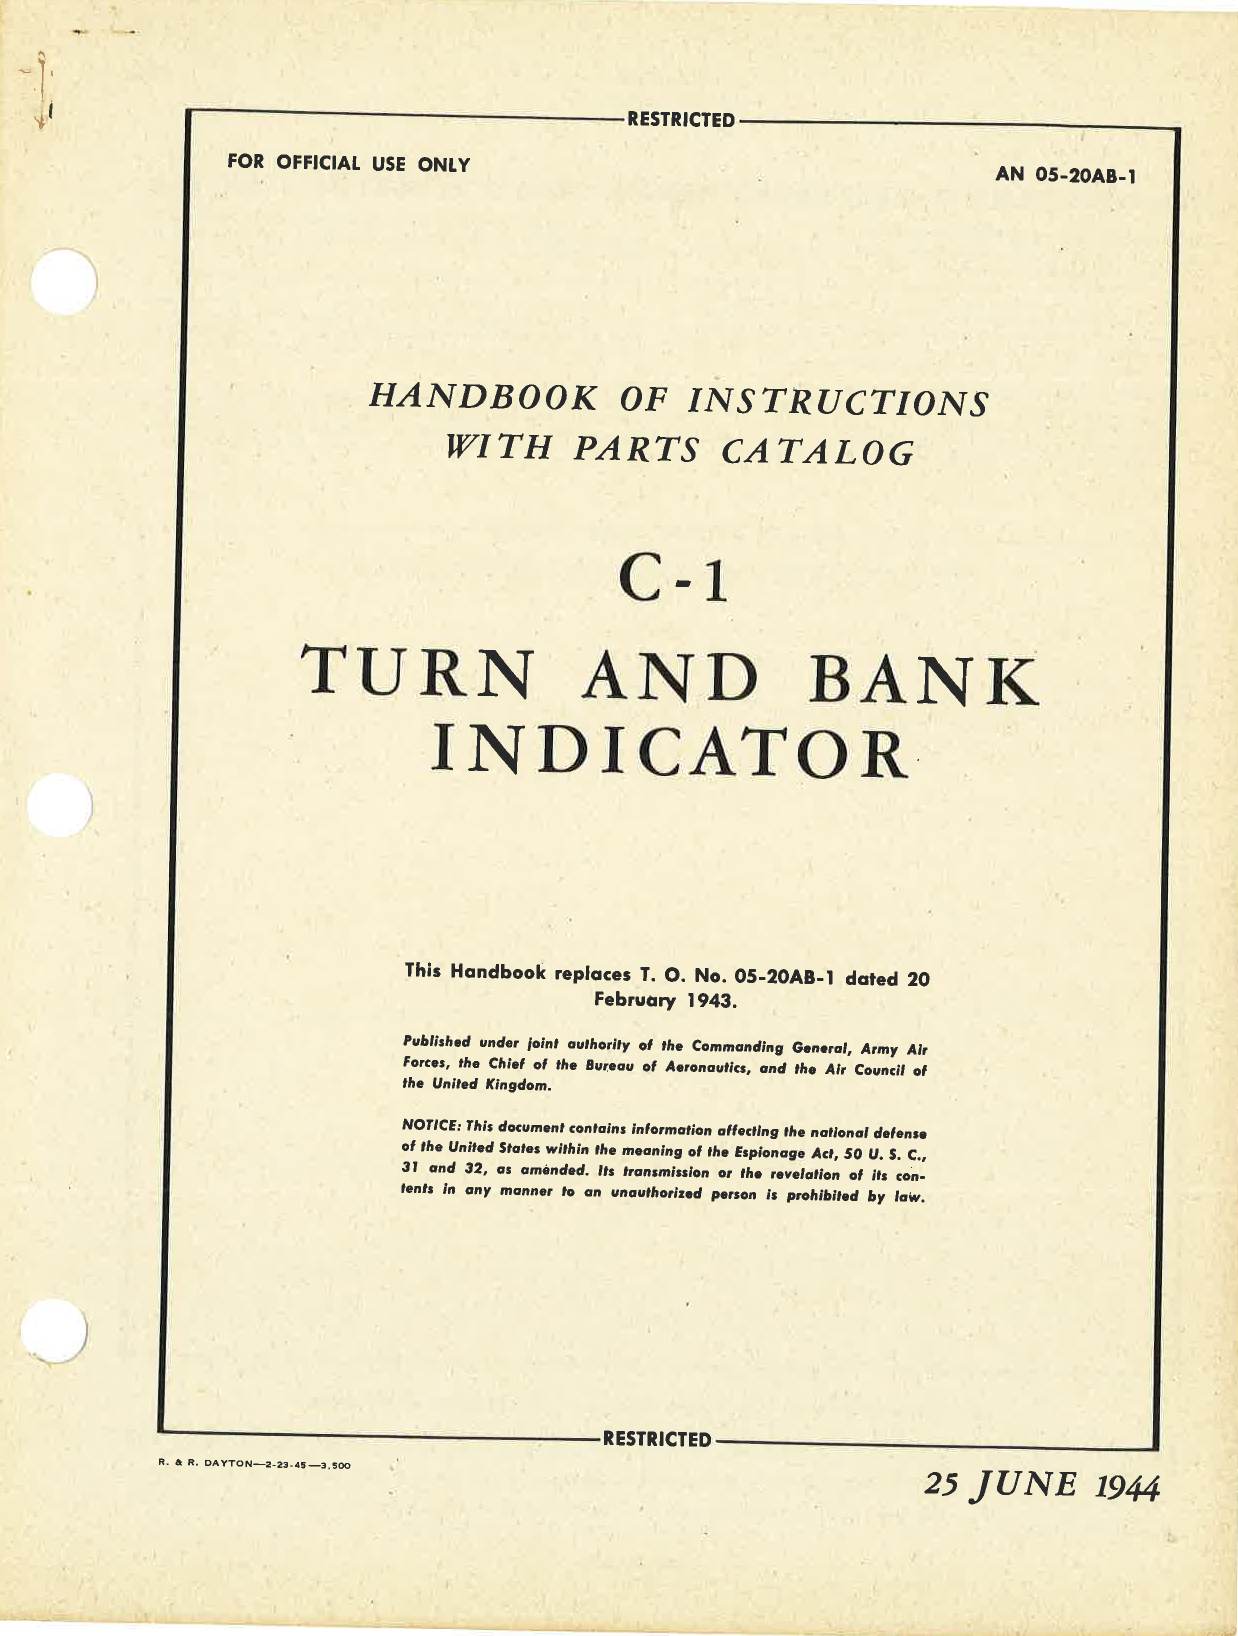 Sample page 1 from AirCorps Library document: Handbook of Instructions with Parts Catalog for C-1 Turn and Bank Indicator